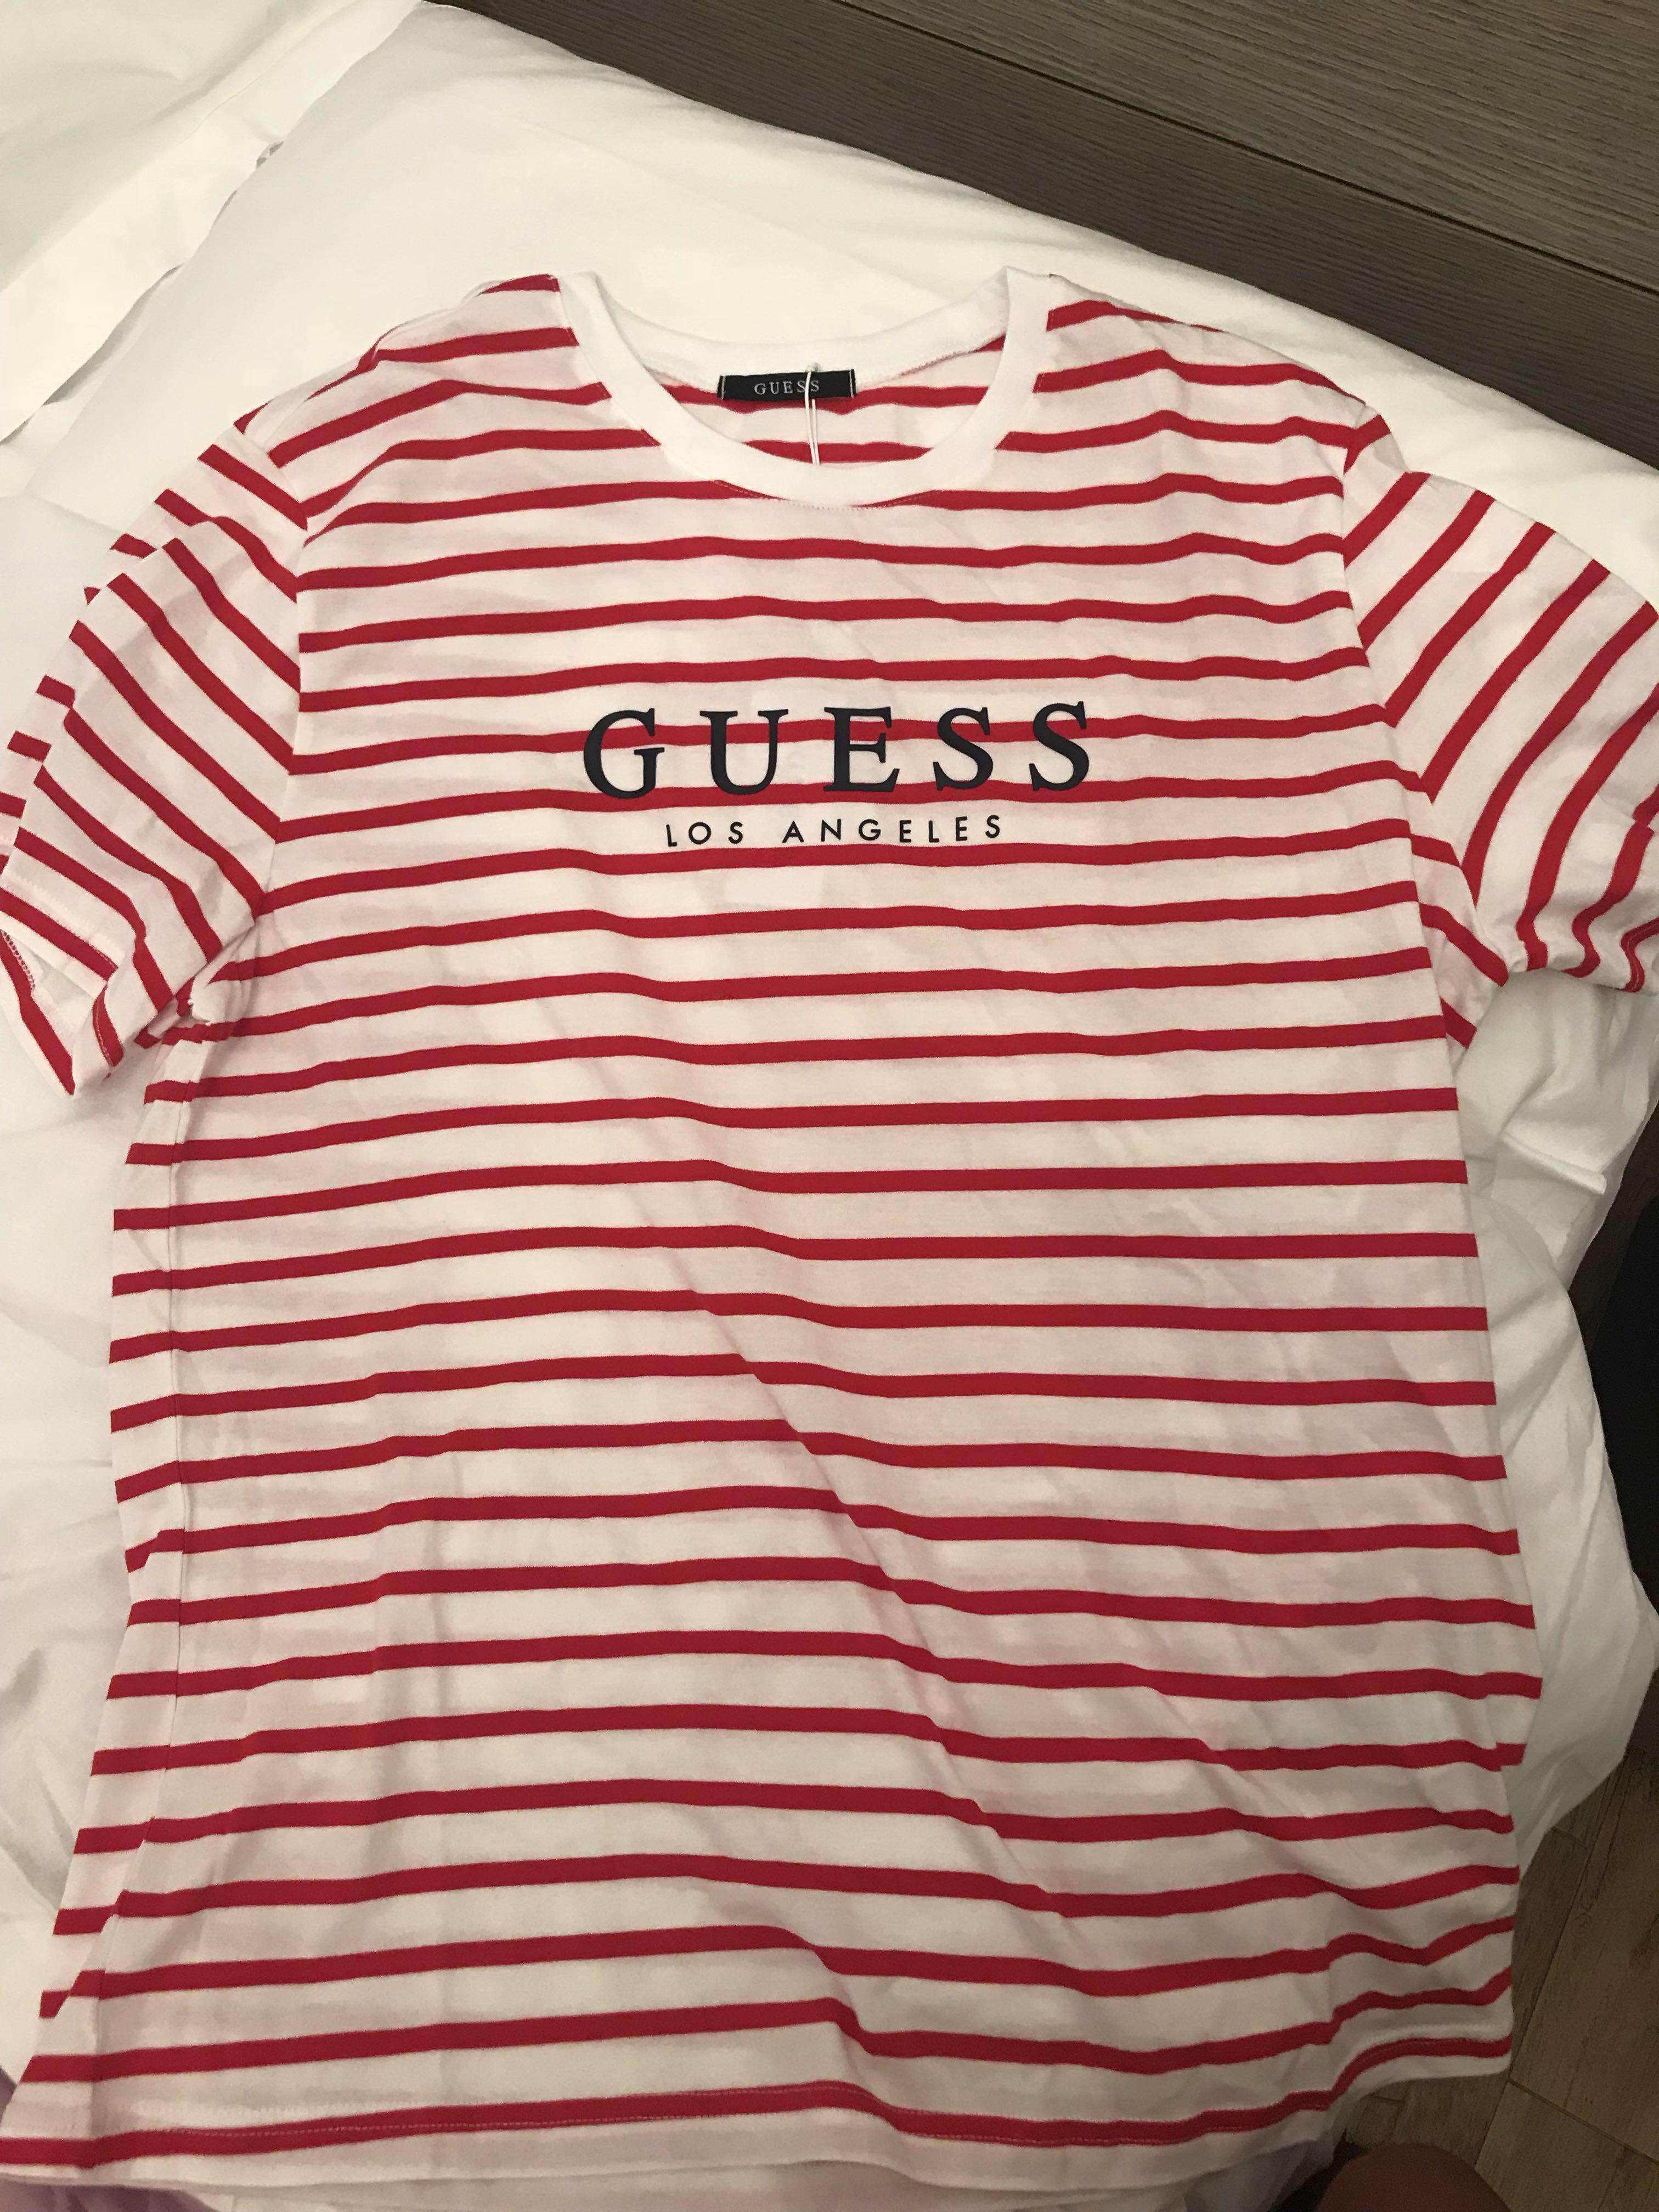 white and red guess shirt